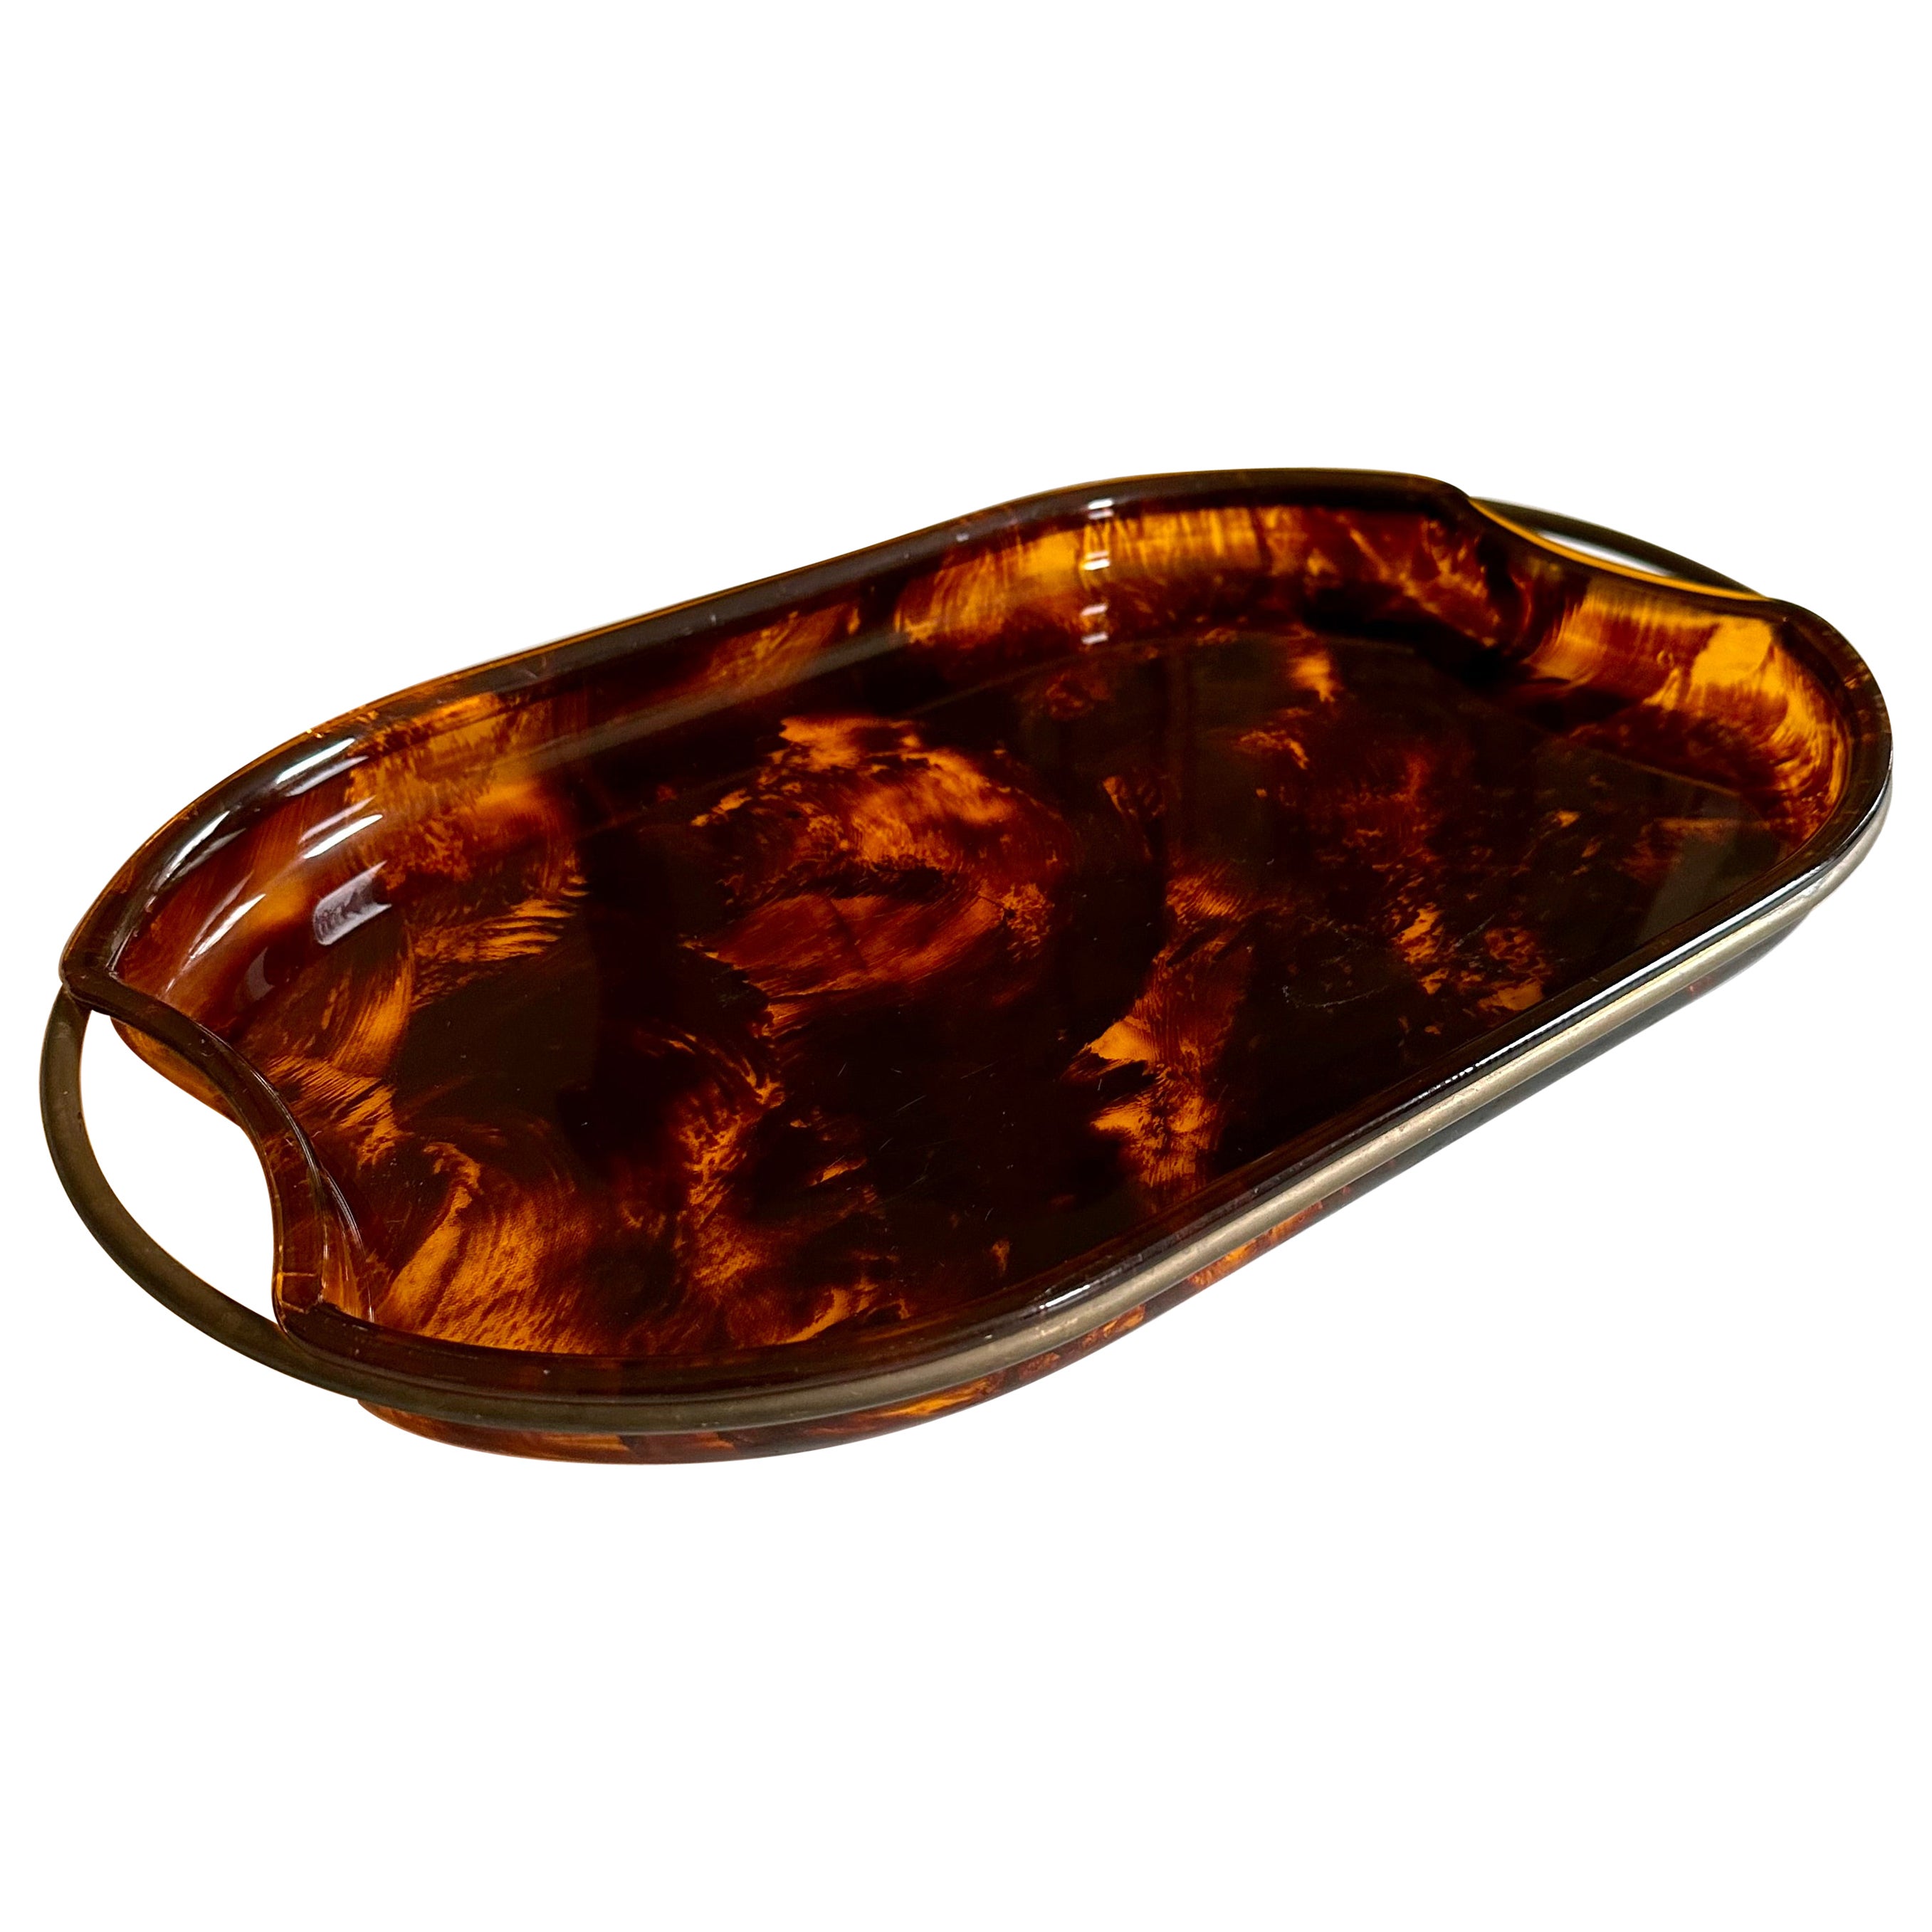  Guzzini’s Oval Lucite Serving Tray from 1970s Italy – Faux Tortoiseshell -brass For Sale